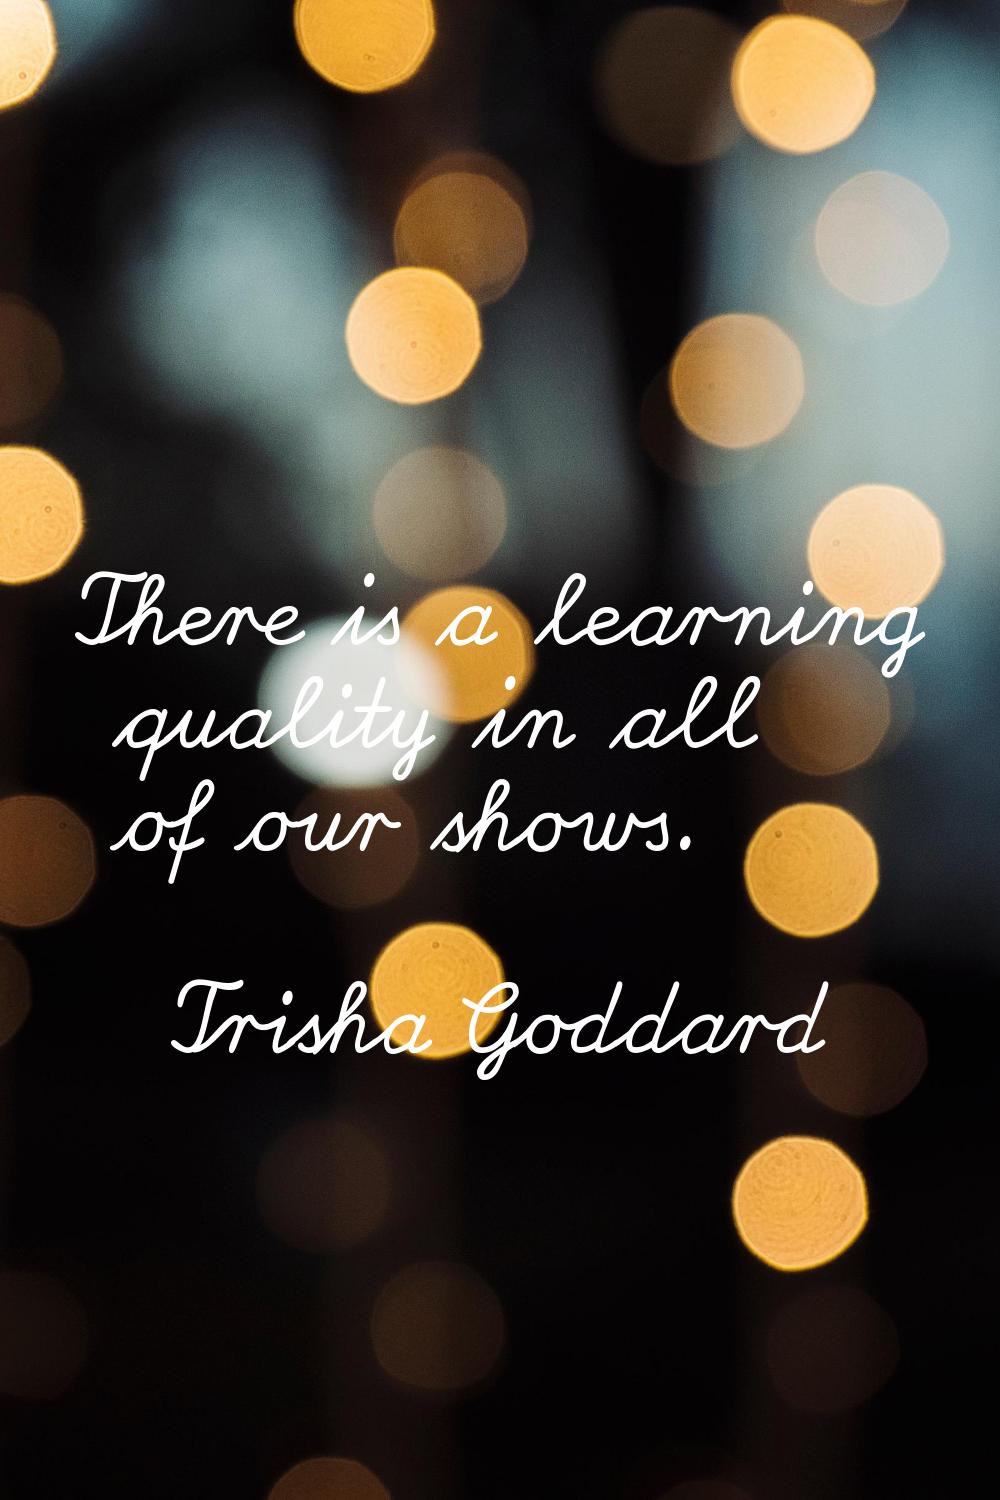 There is a learning quality in all of our shows.